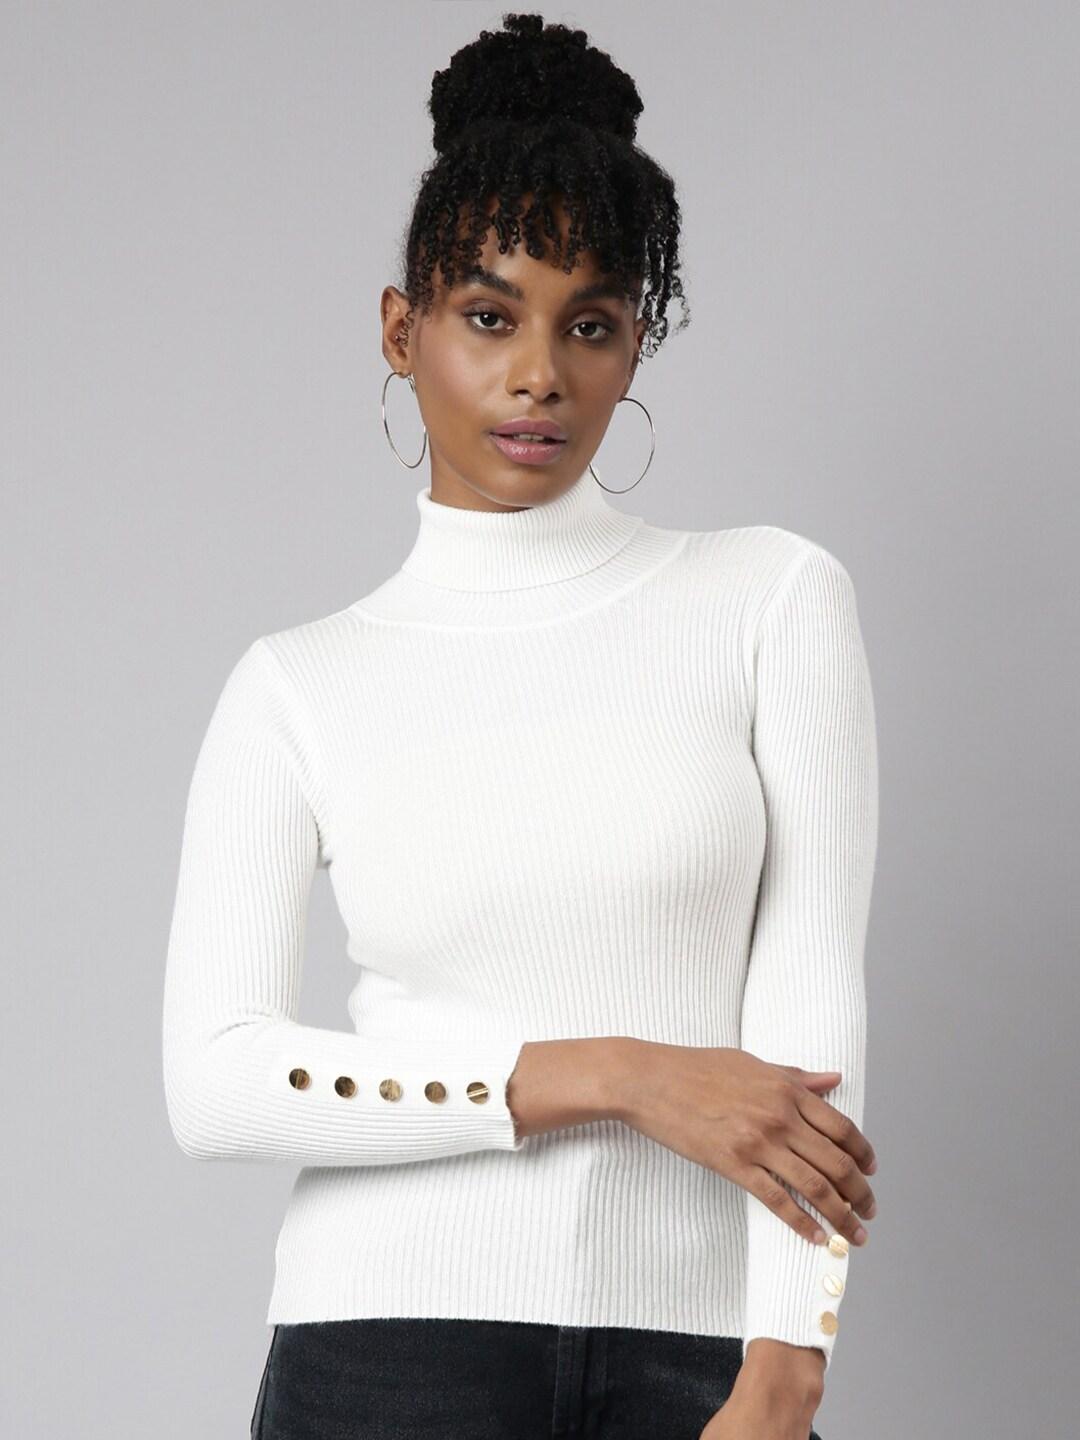 showoff high neck long sleeves monochrome top